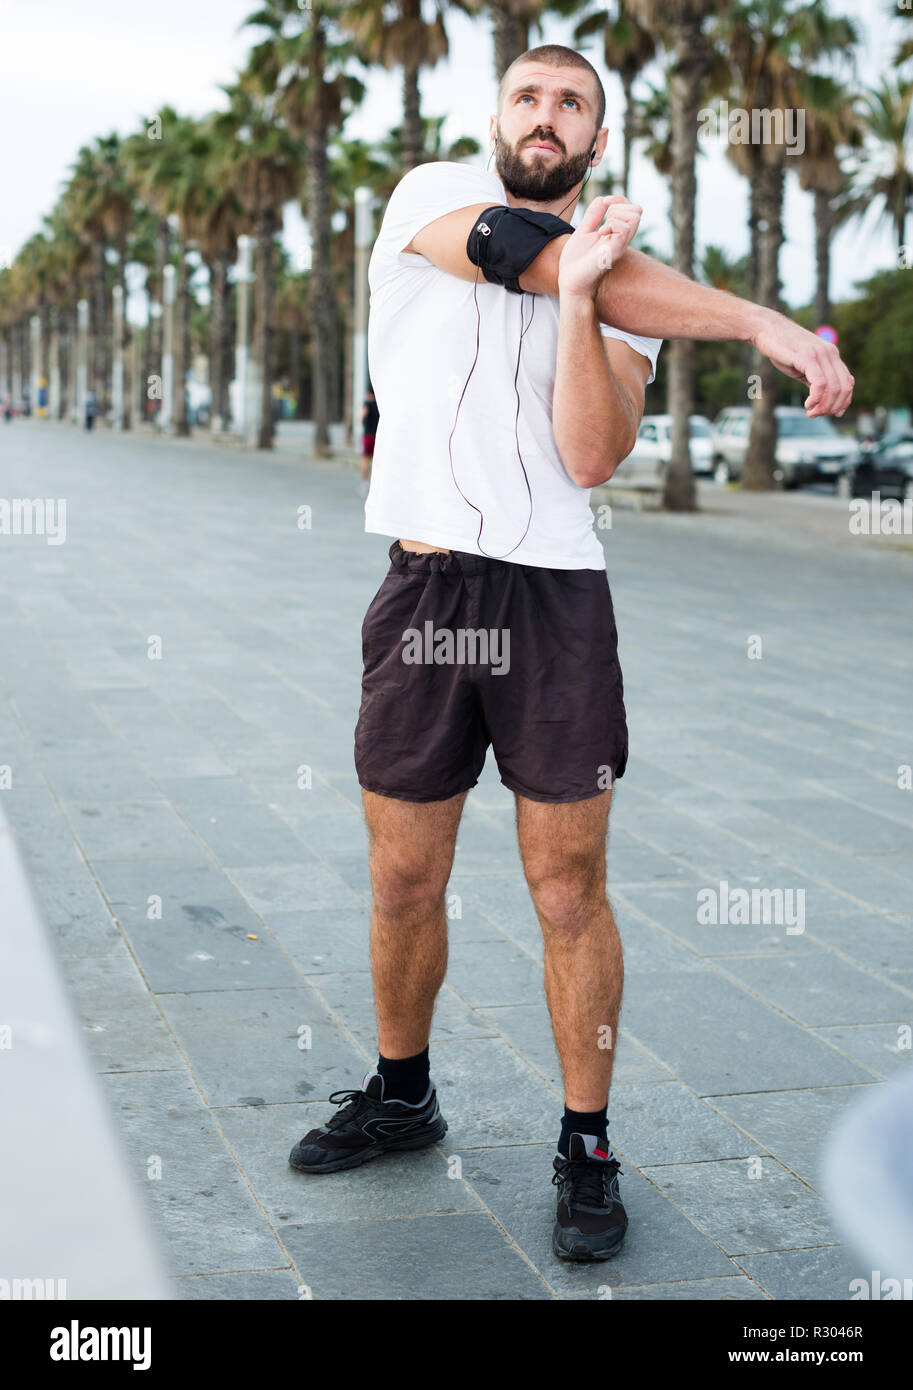 Athletic male performs warm-up exercises before training Stock Photo